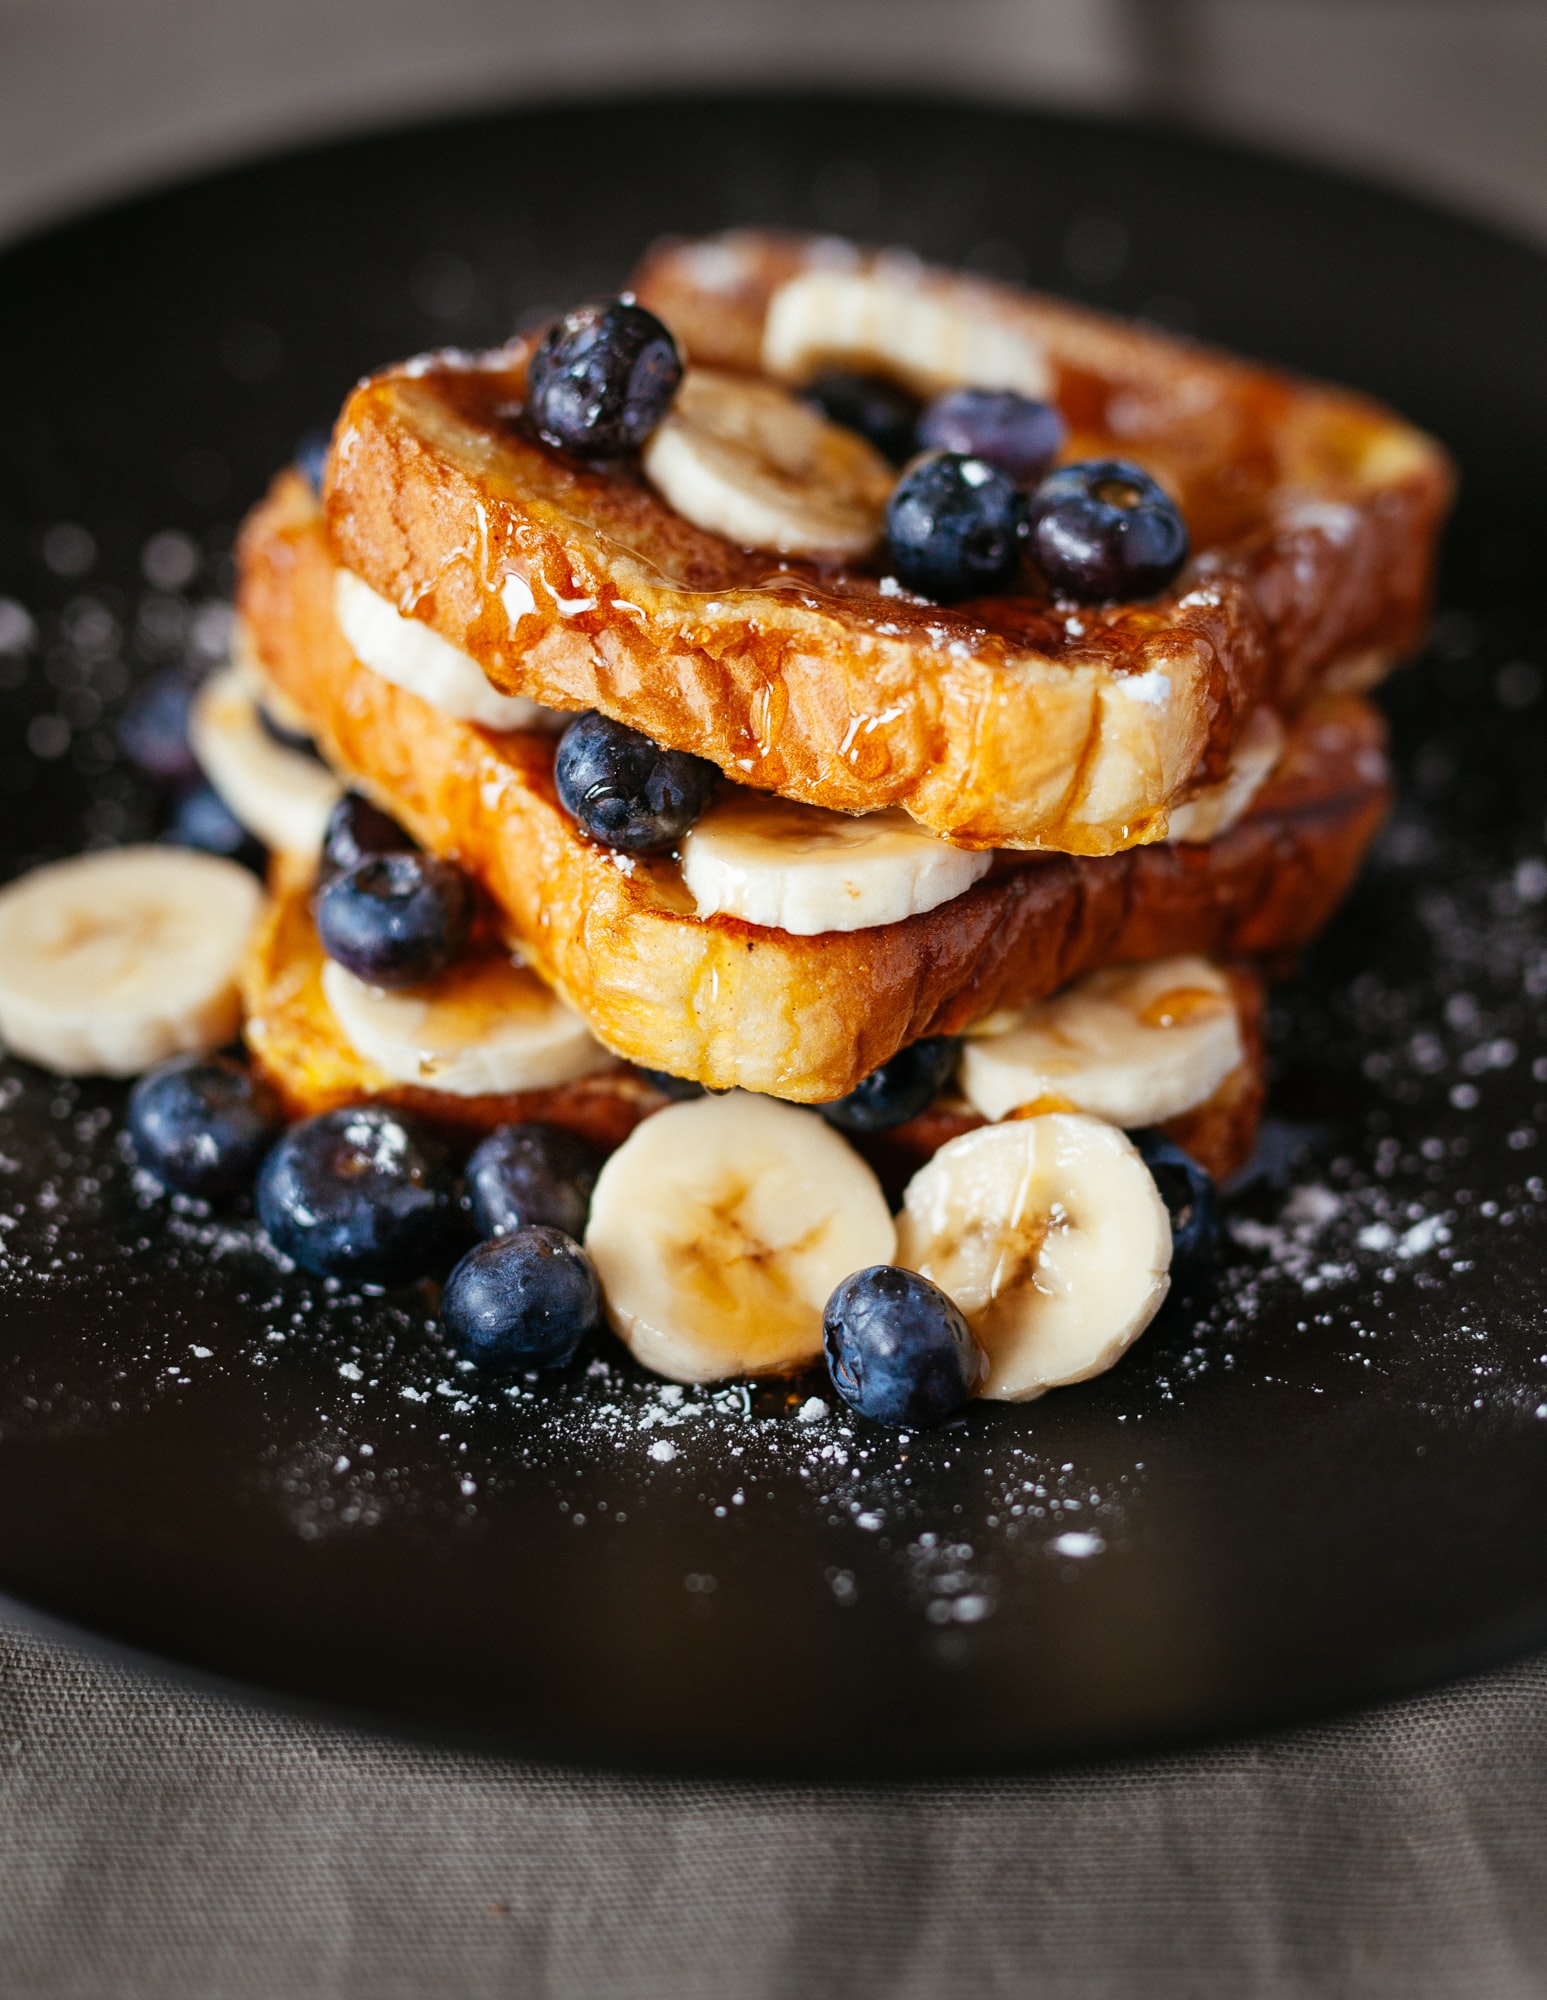 Campfire Cooking: Mascarpone-Stuffed French Toast